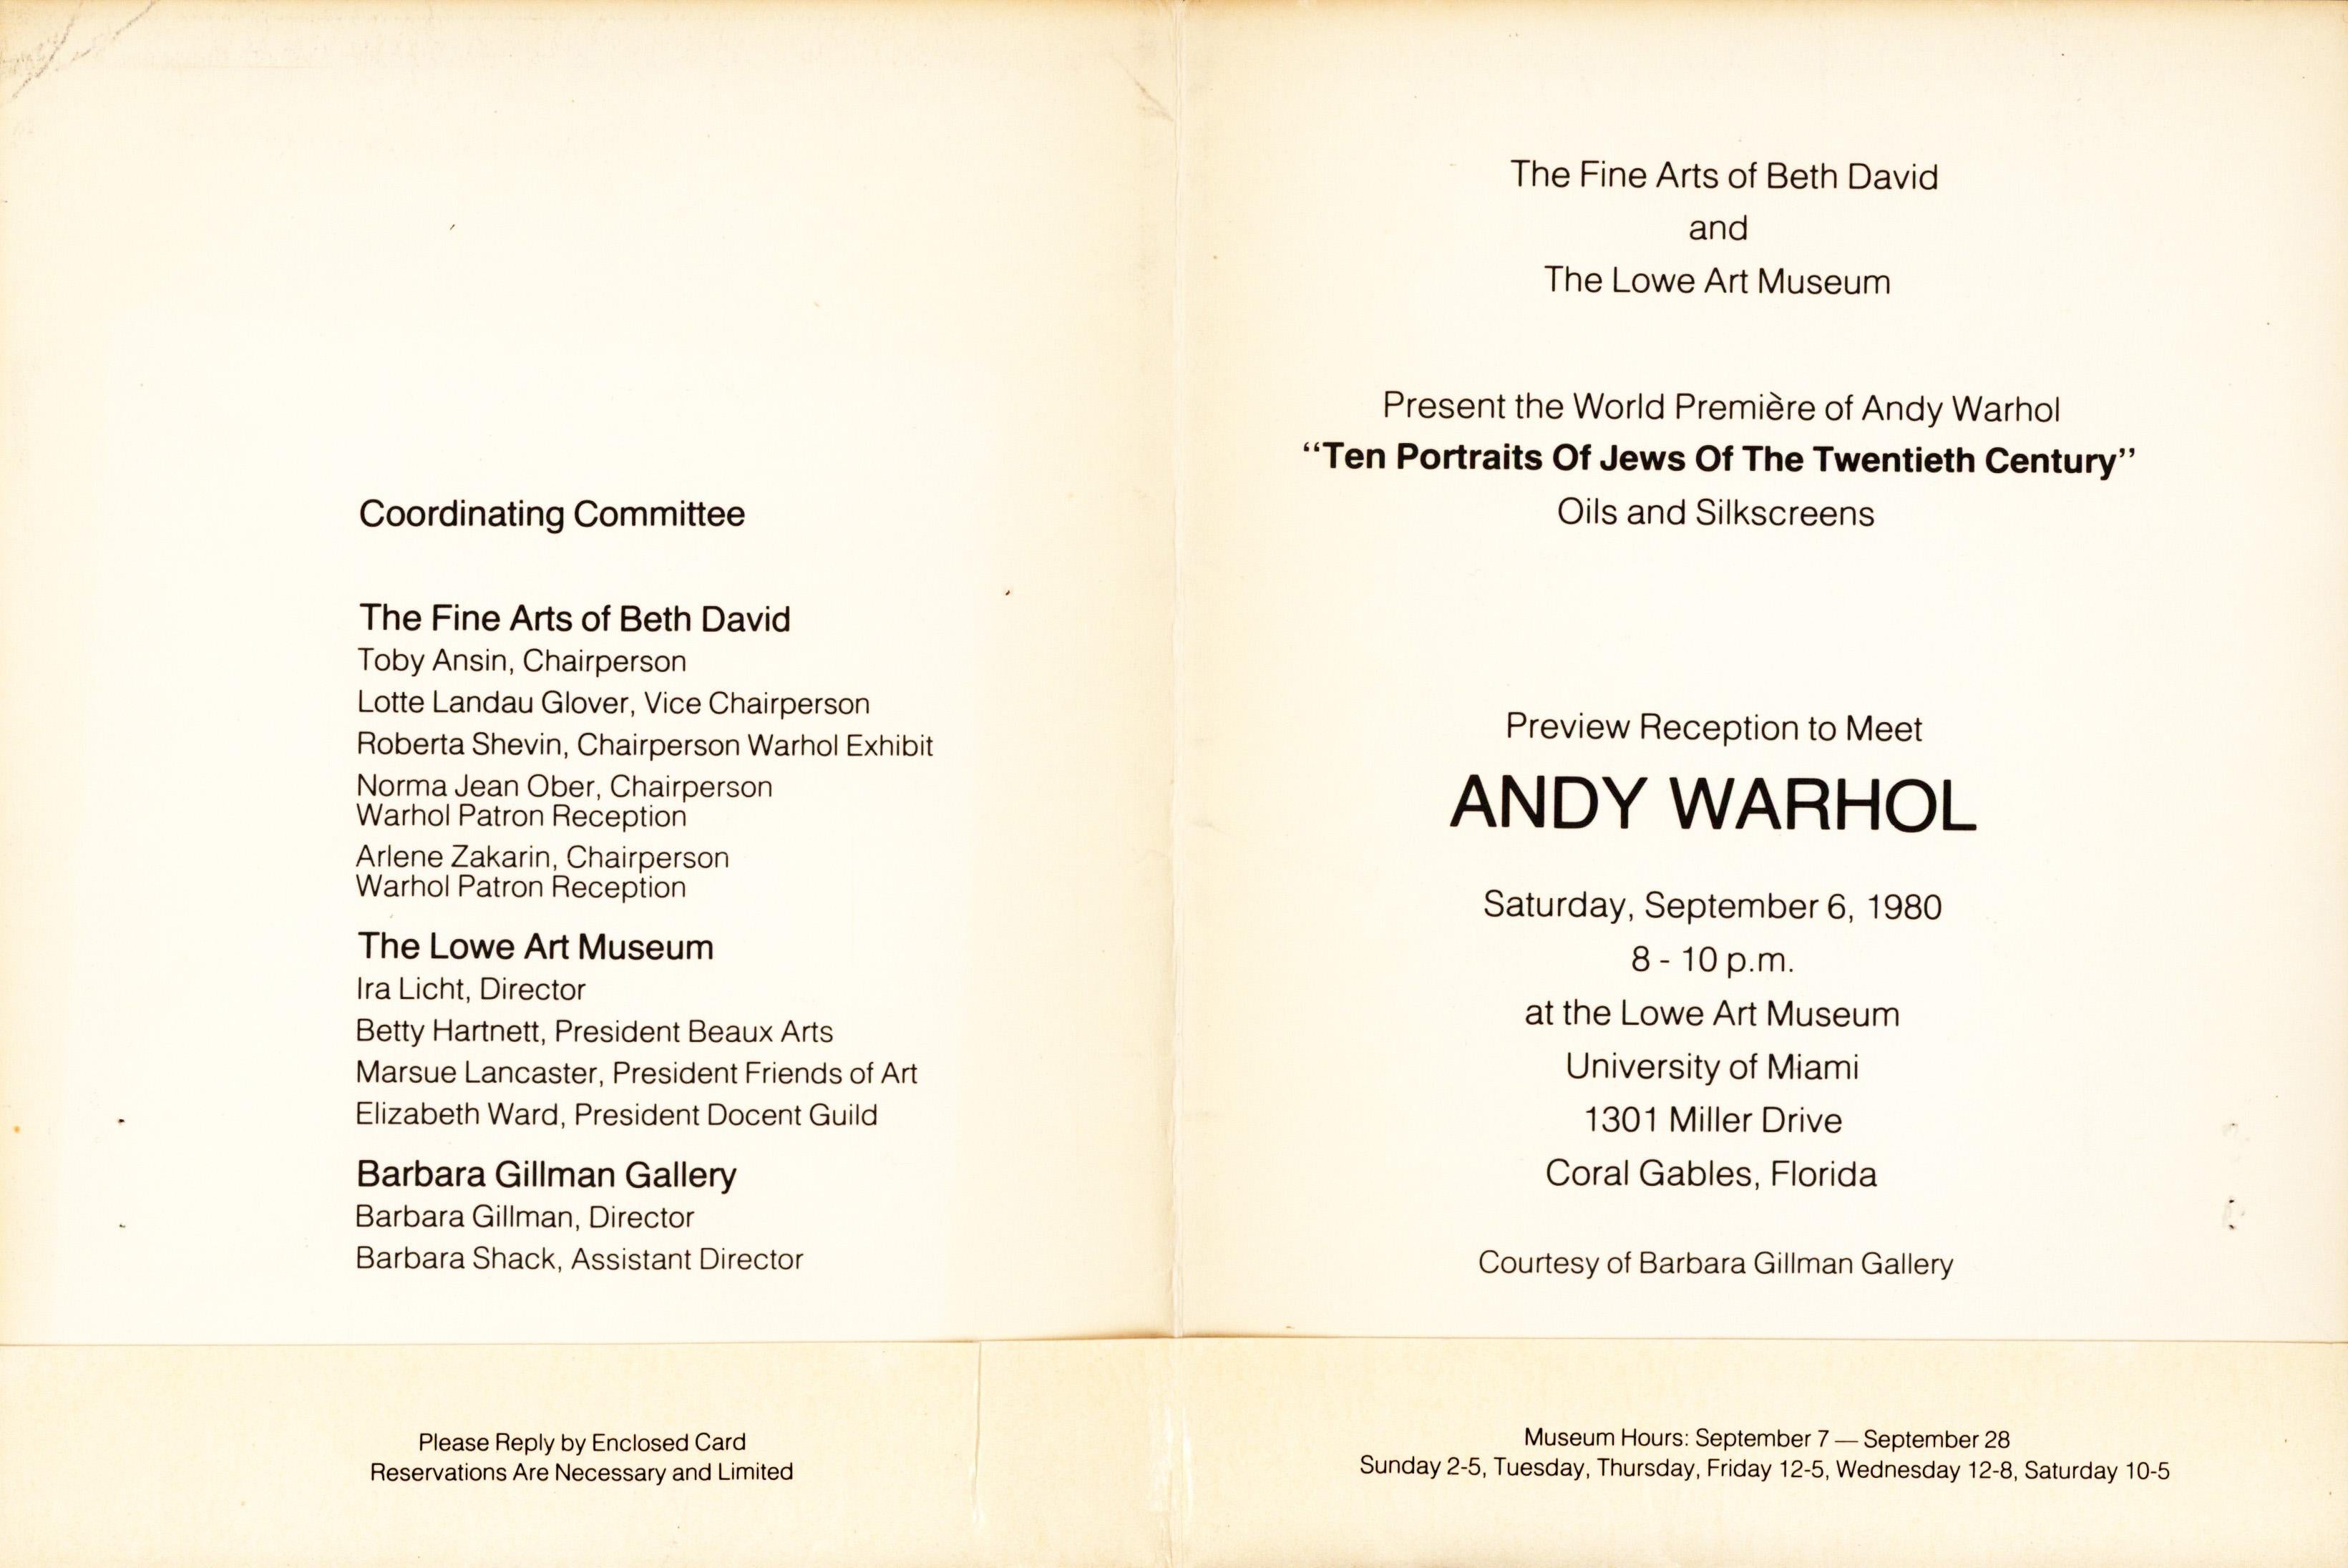 Andy Warhol Portraits of Jews of the 20th Century (announcements; Signed cover) 10